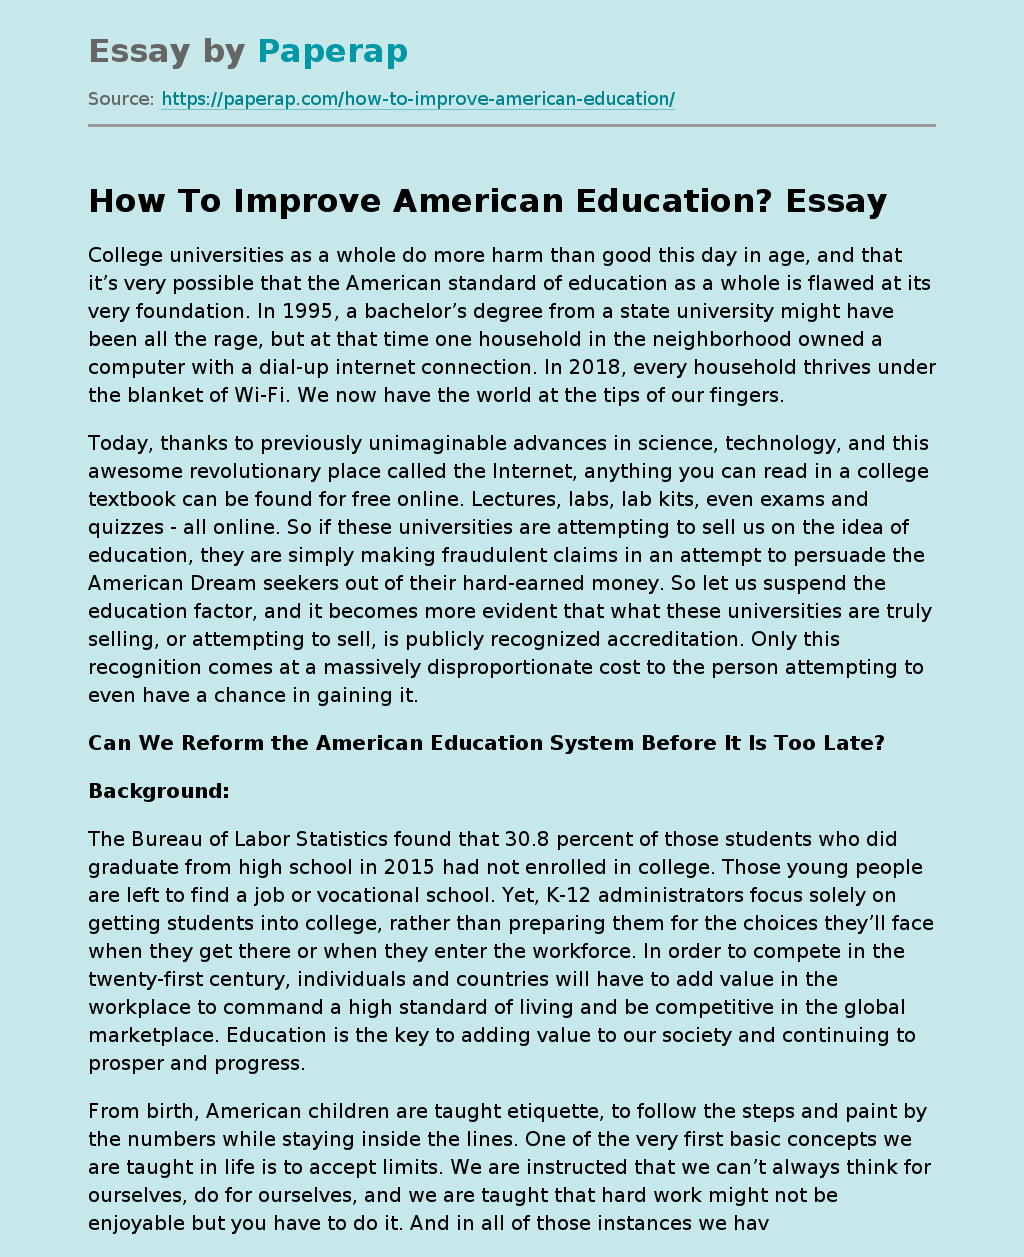 How To Improve American Education?